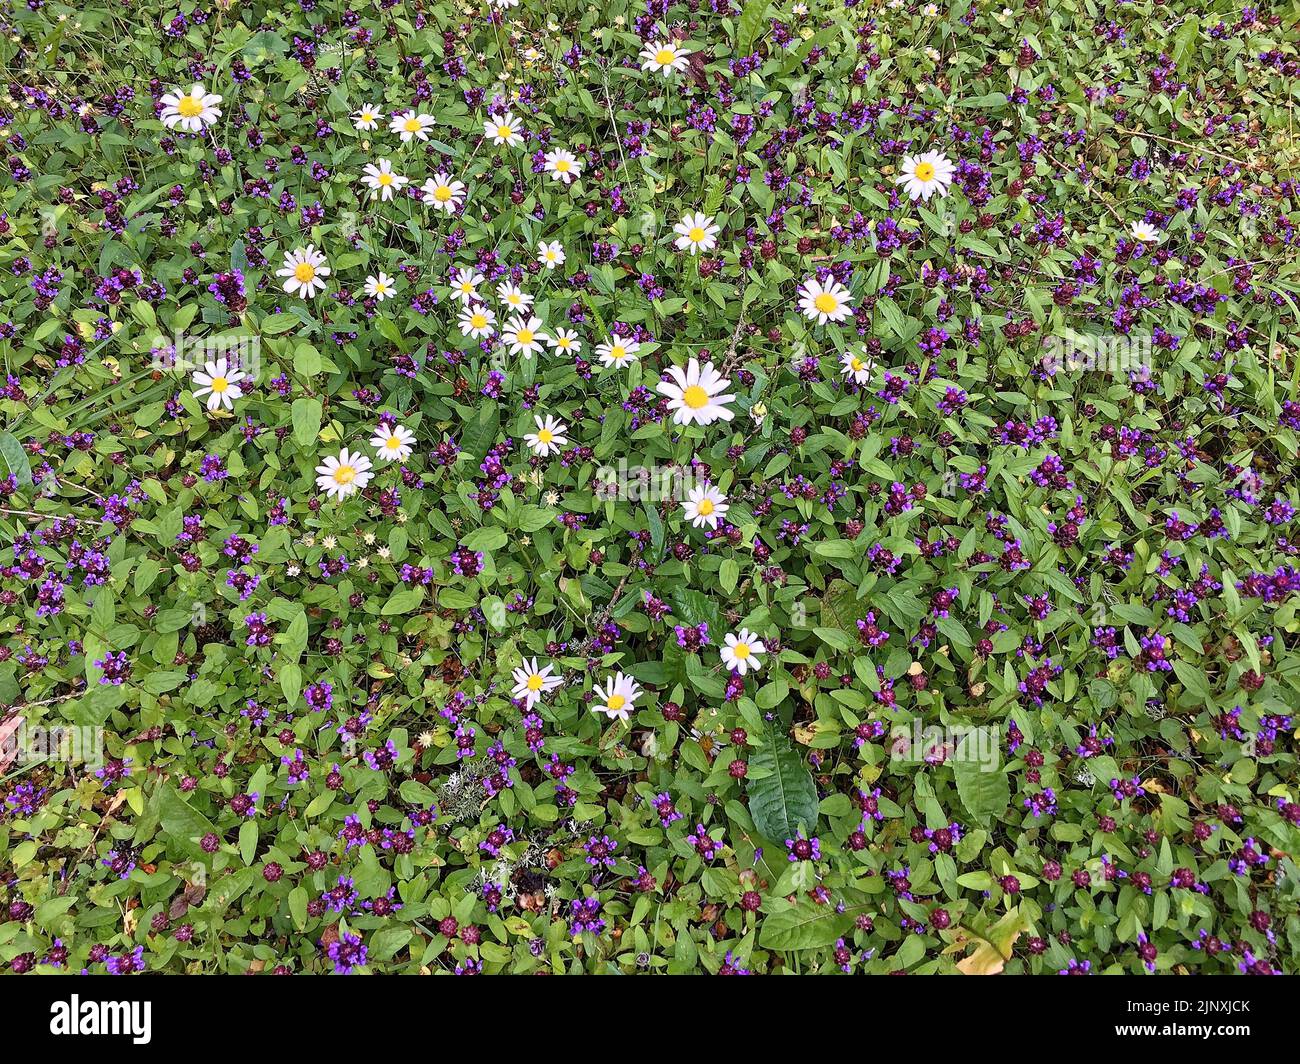 Common self-heal (Prunella vulgaris) and Oxeye daisy (Leucanthemum vulgare) form a nice pattern in grass. Stock Photo